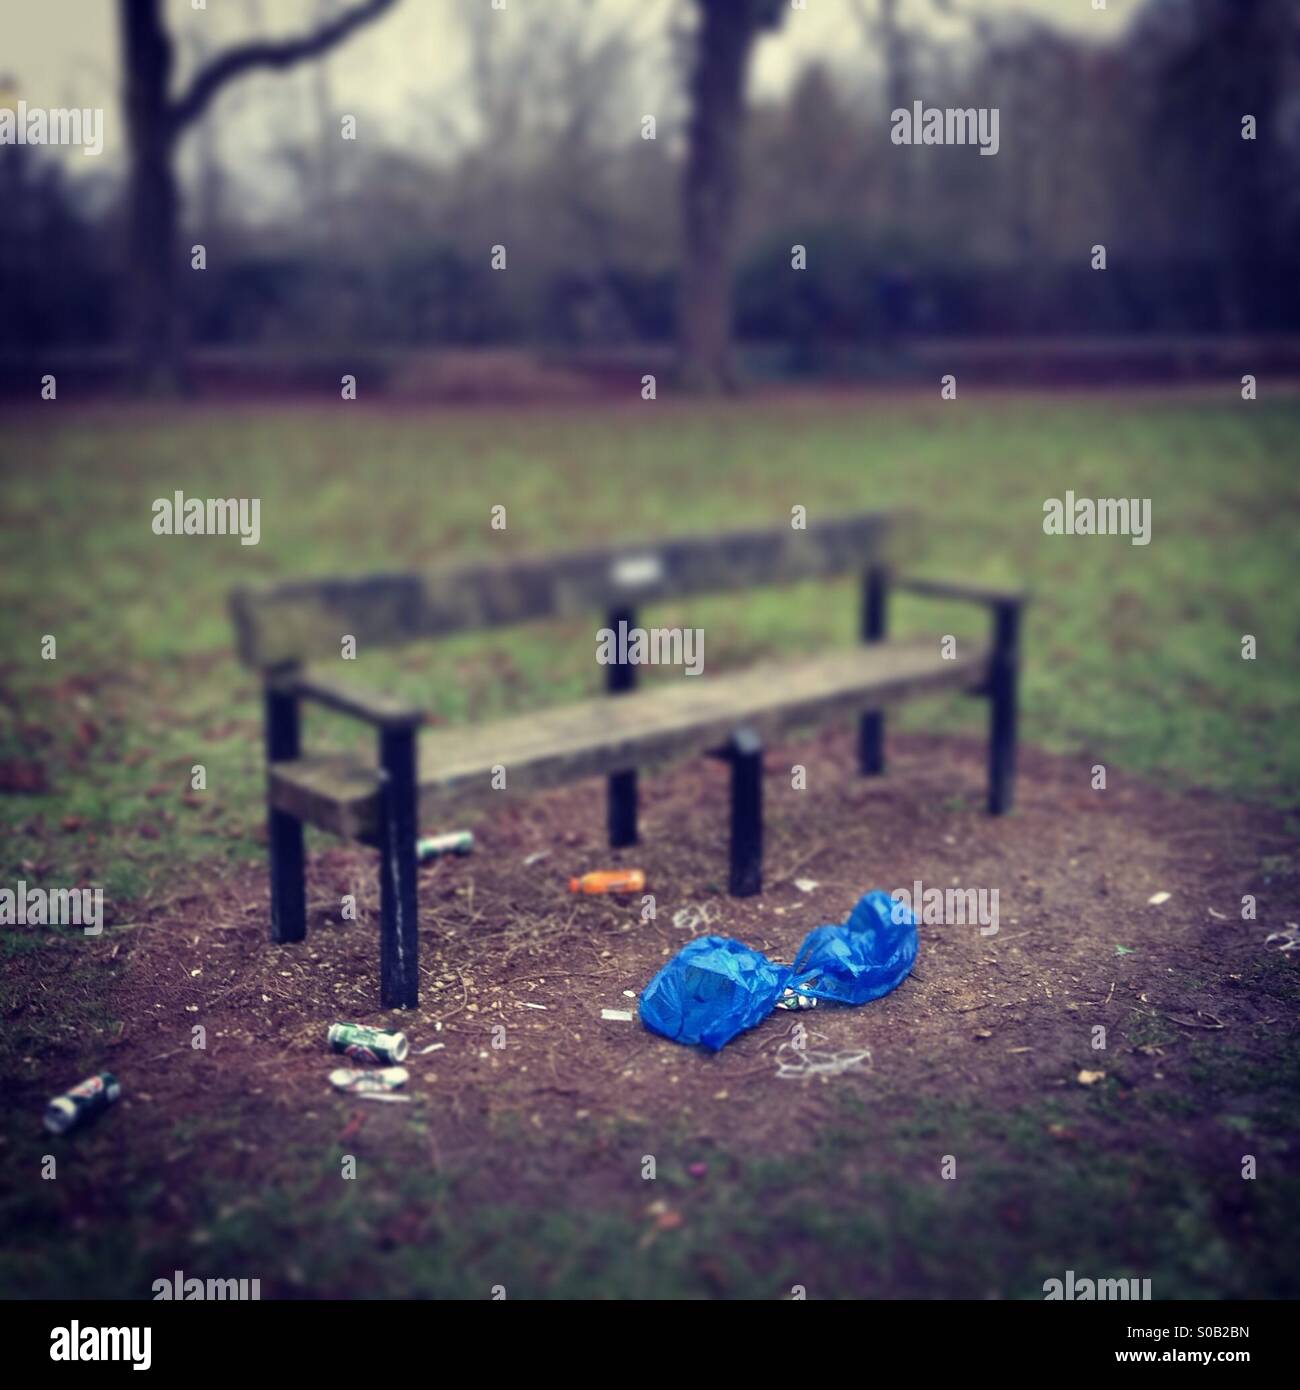 Rubbish by a bench Stock Photo